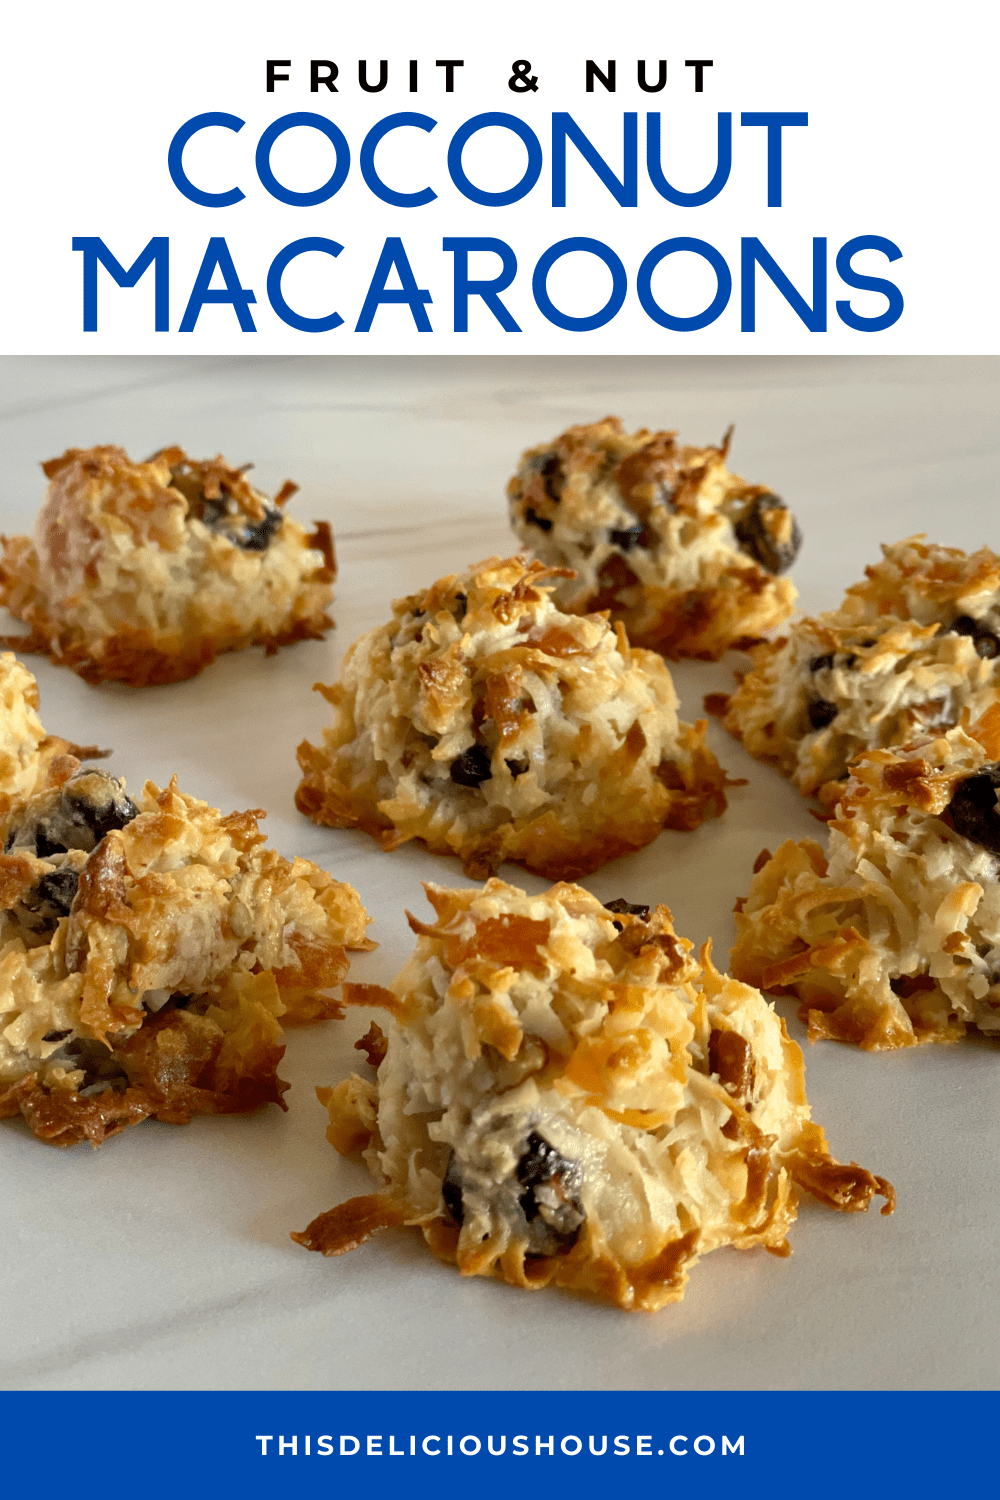 Pinterest Pin for Coconut Macaroons with fruit and nuts. 